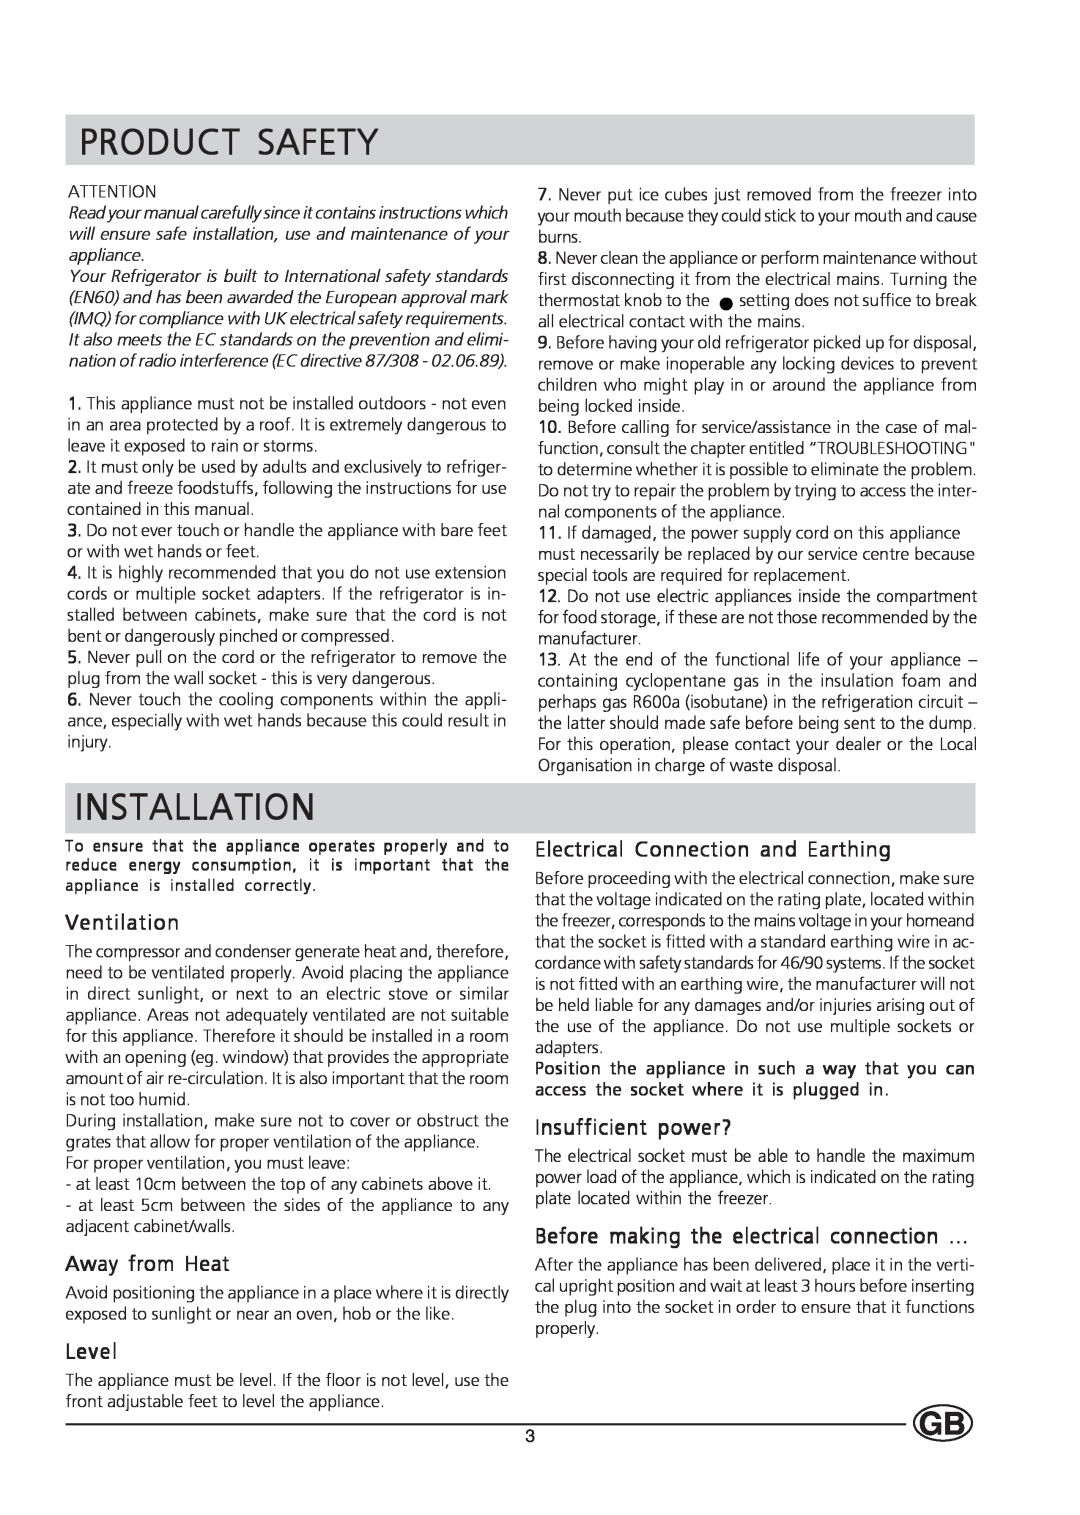 Hotpoint HM450 manual Product Safety, Installation, Ventilation, Away from Heat, Level, Electrical Connection and Earthing 